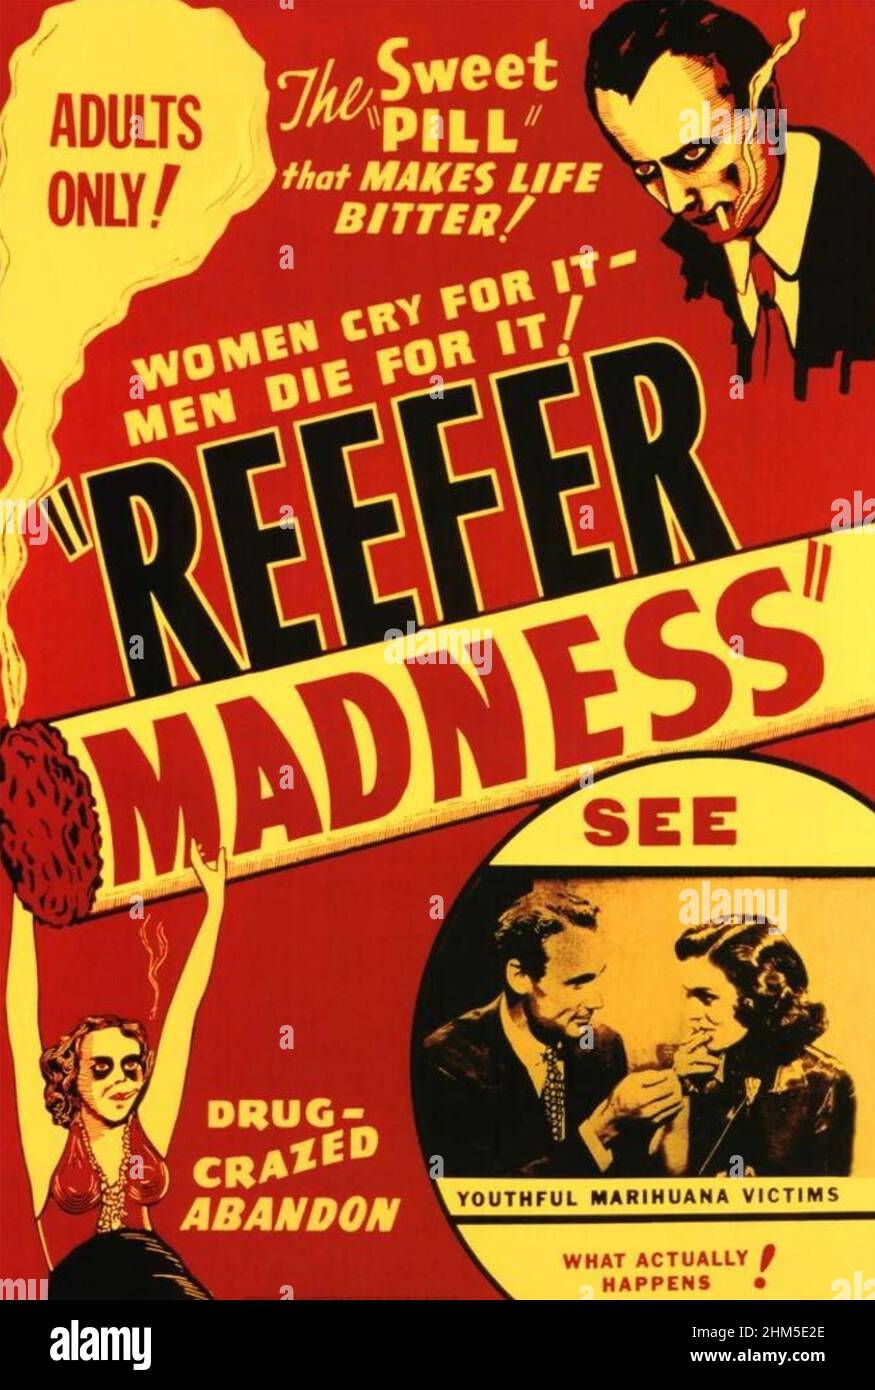 REEFER MADNESS 1936 Motion Picture Ventures Film Stockfoto